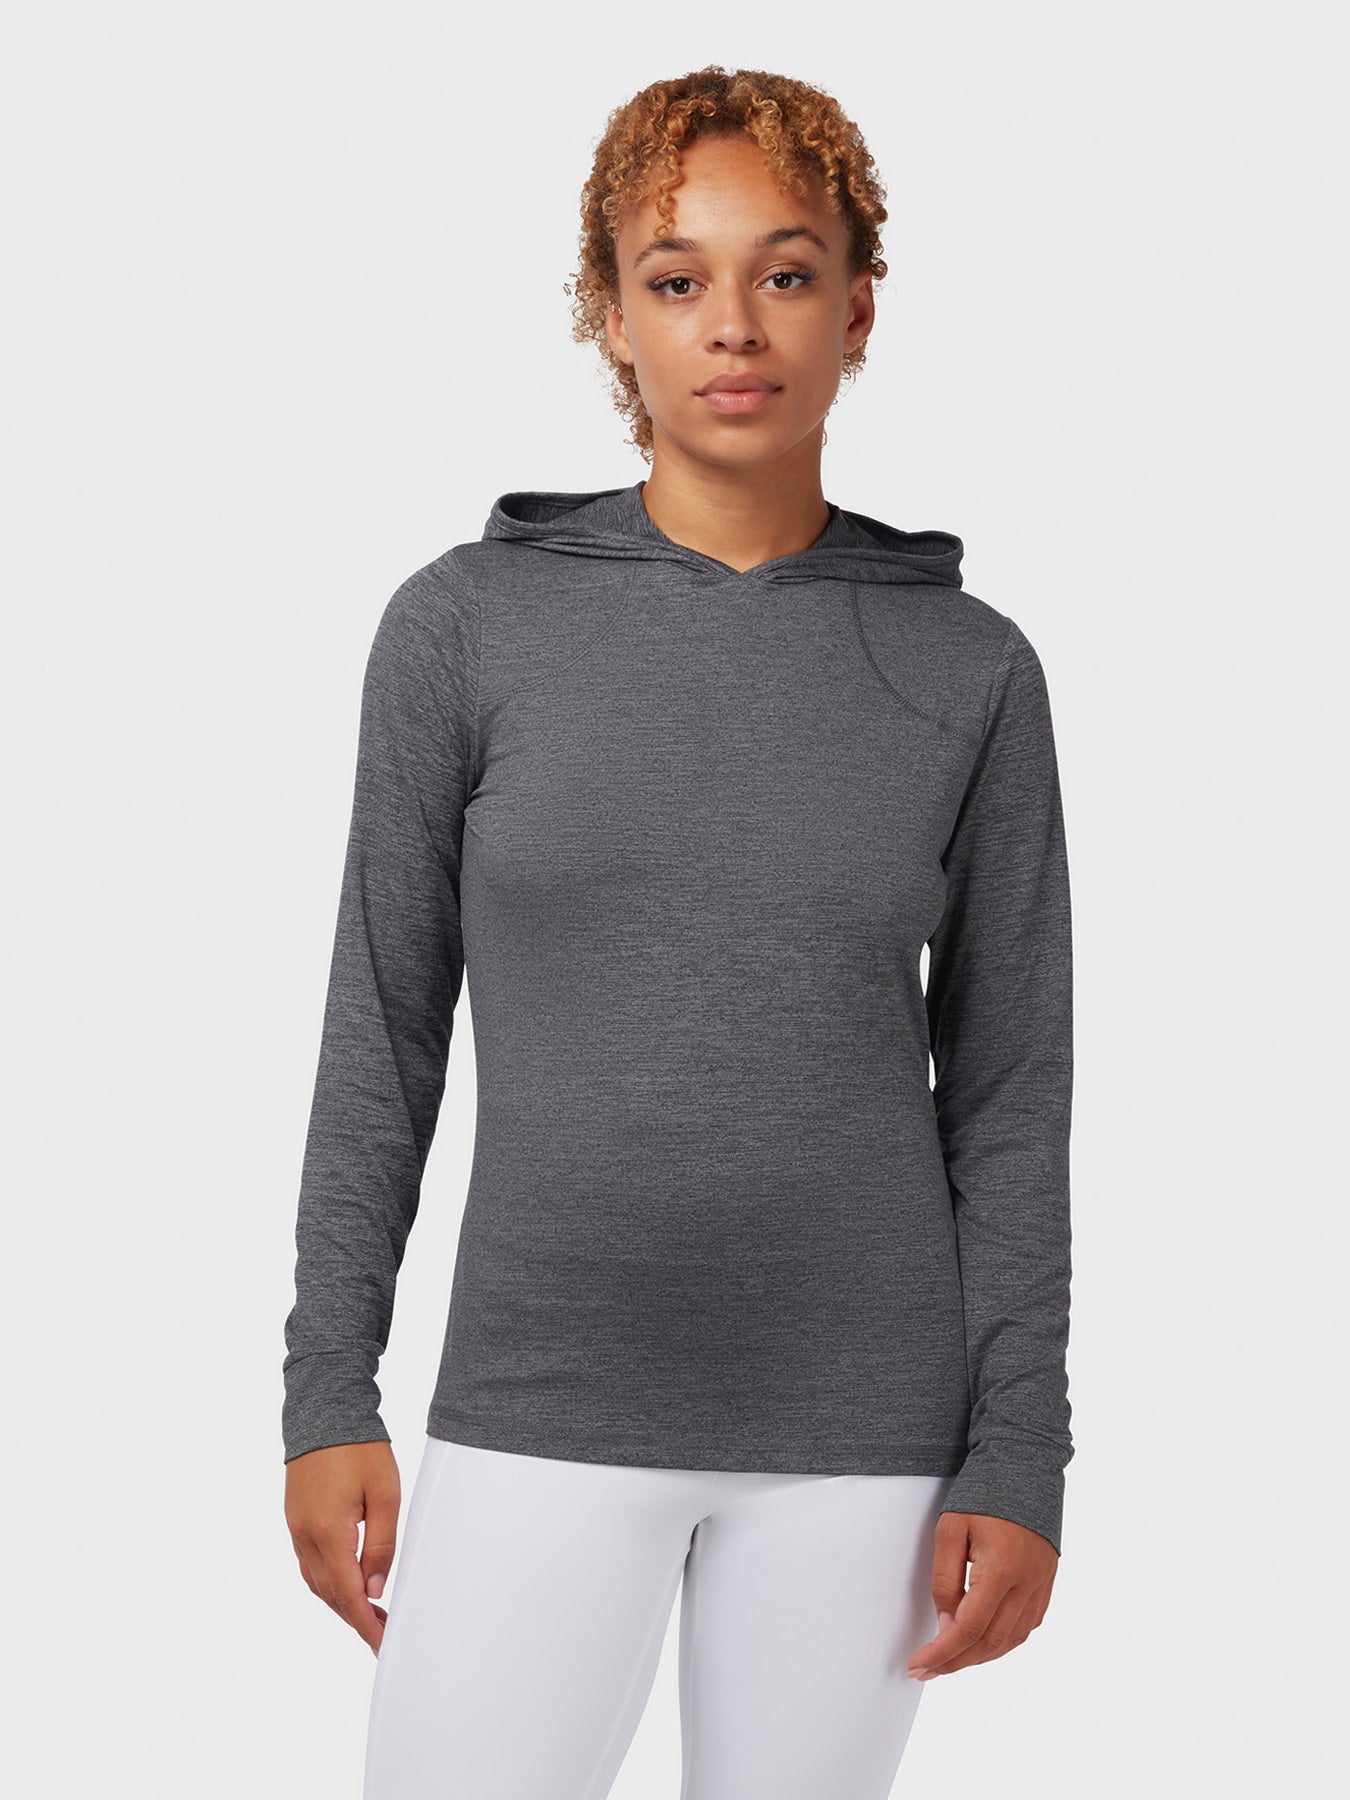 View Brushed Heather Womens Hoodie In Black Heather Black Heather S information